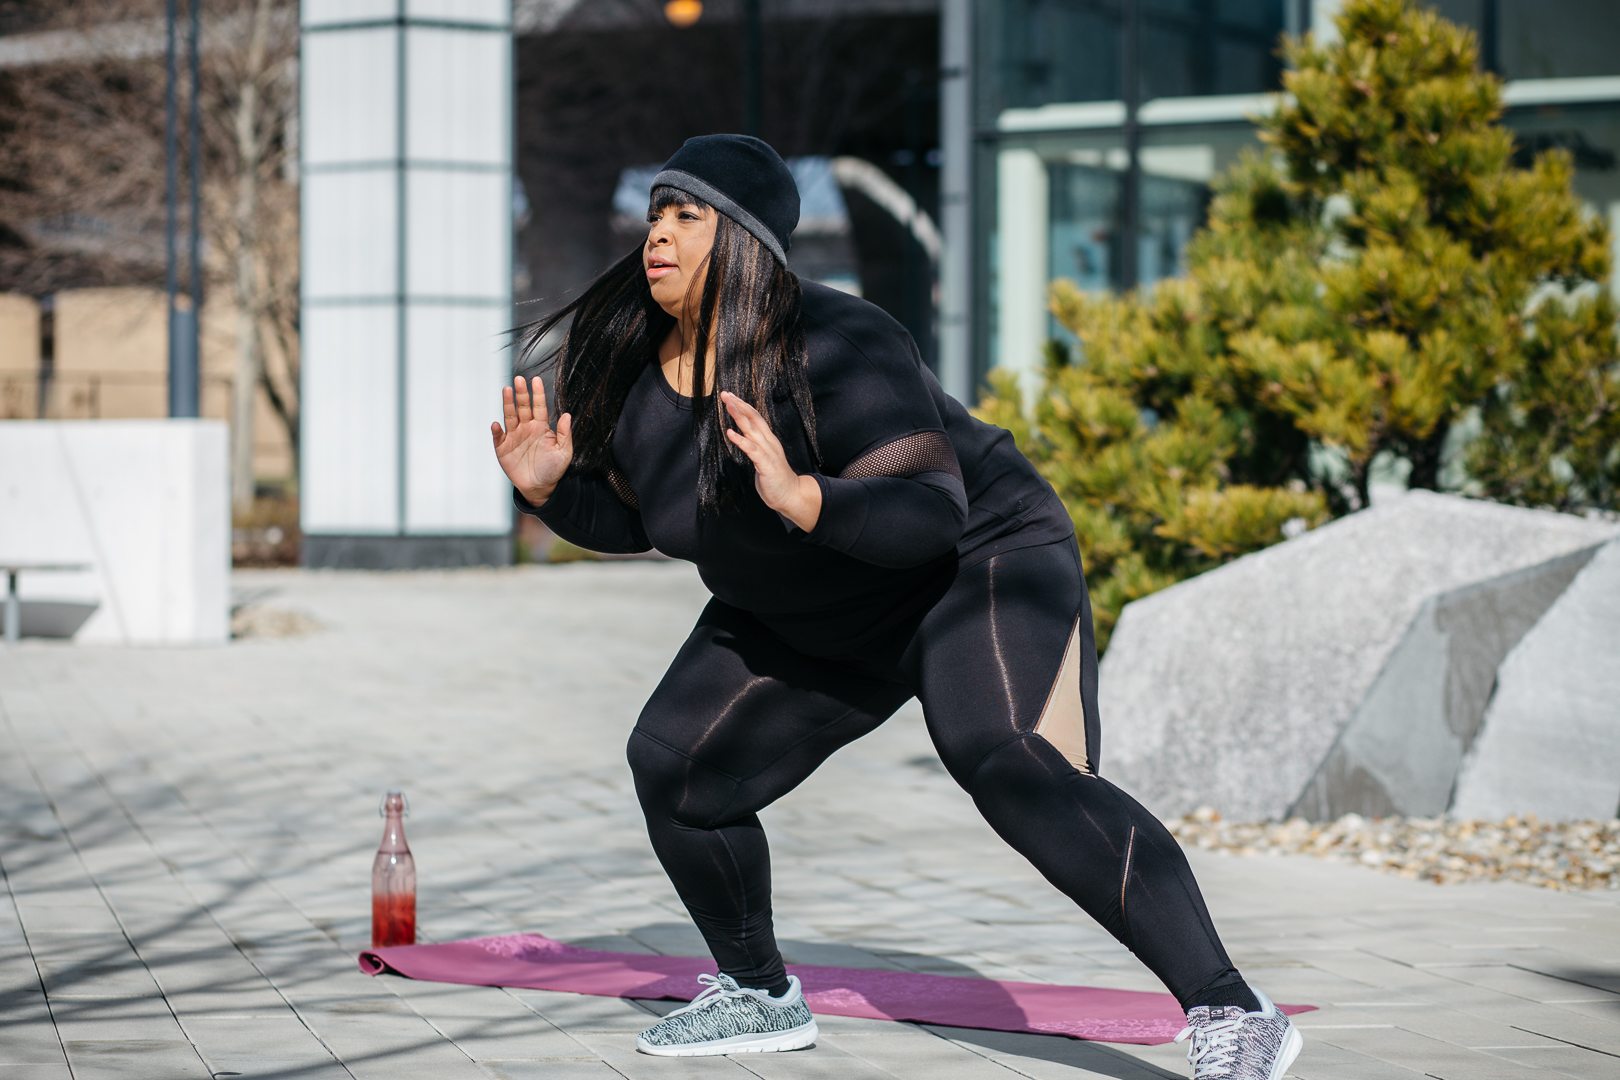 plus size women working out